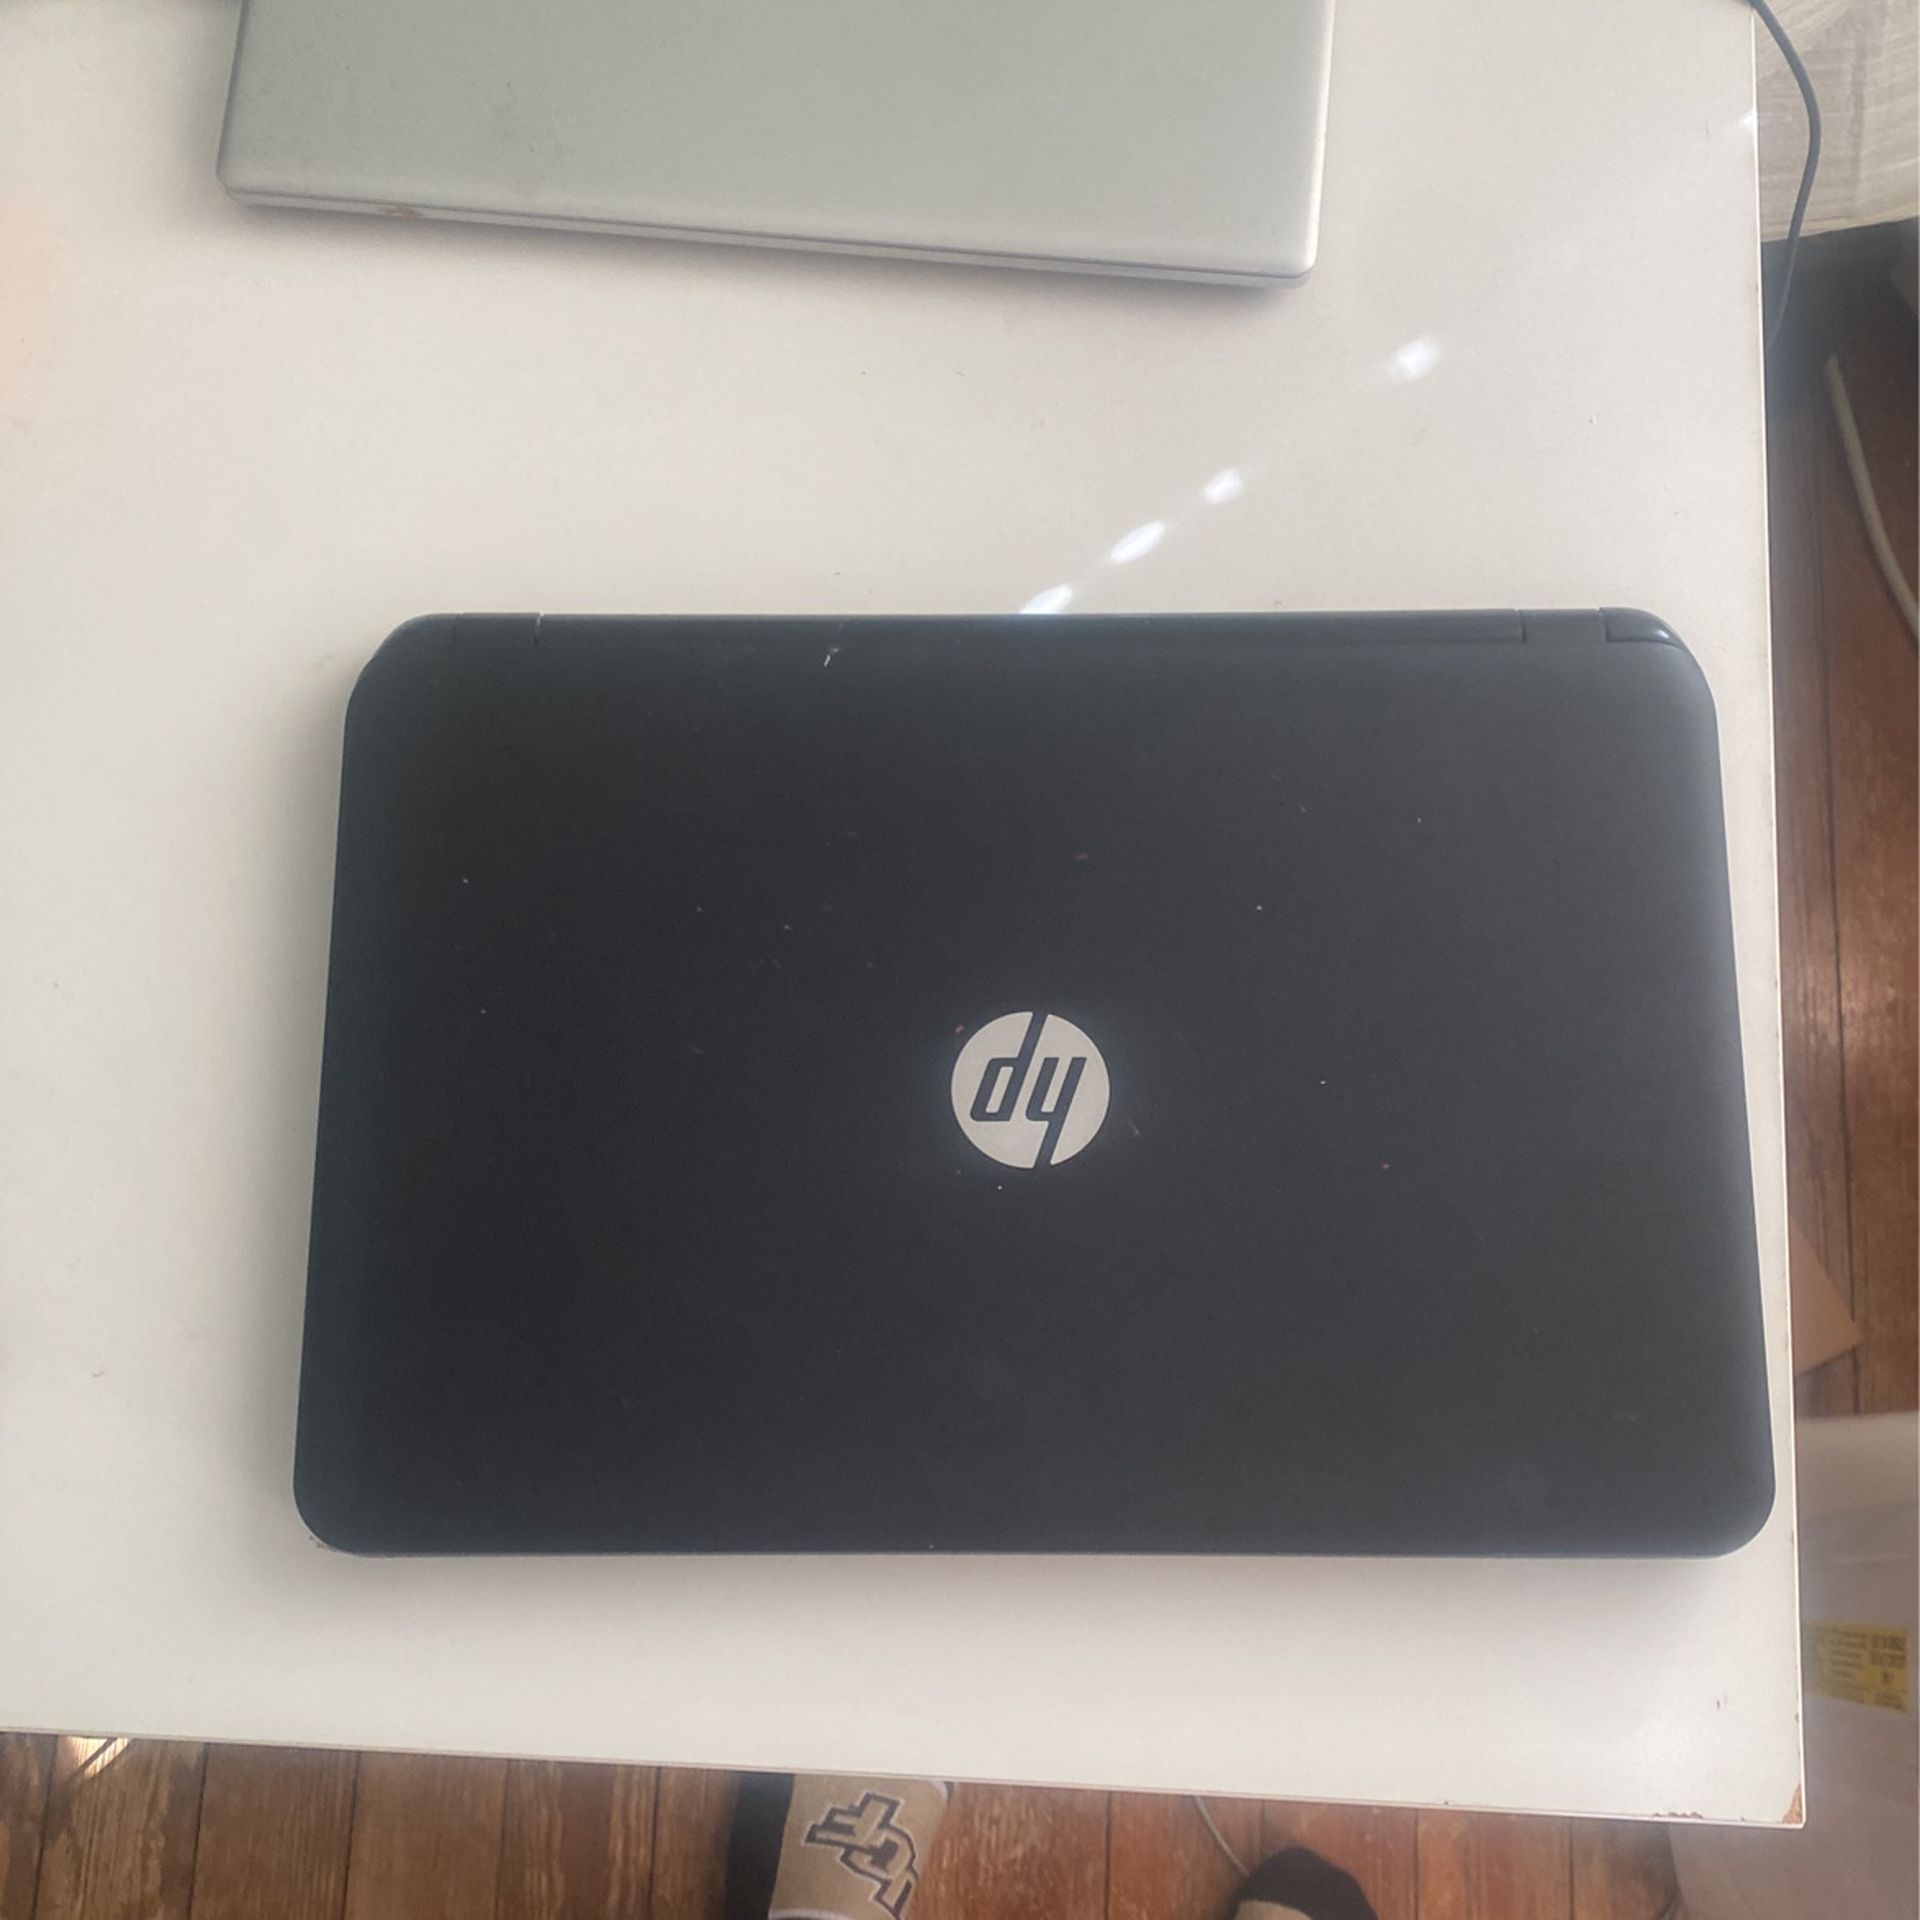 2 for 1 Sale On Both Laptops 